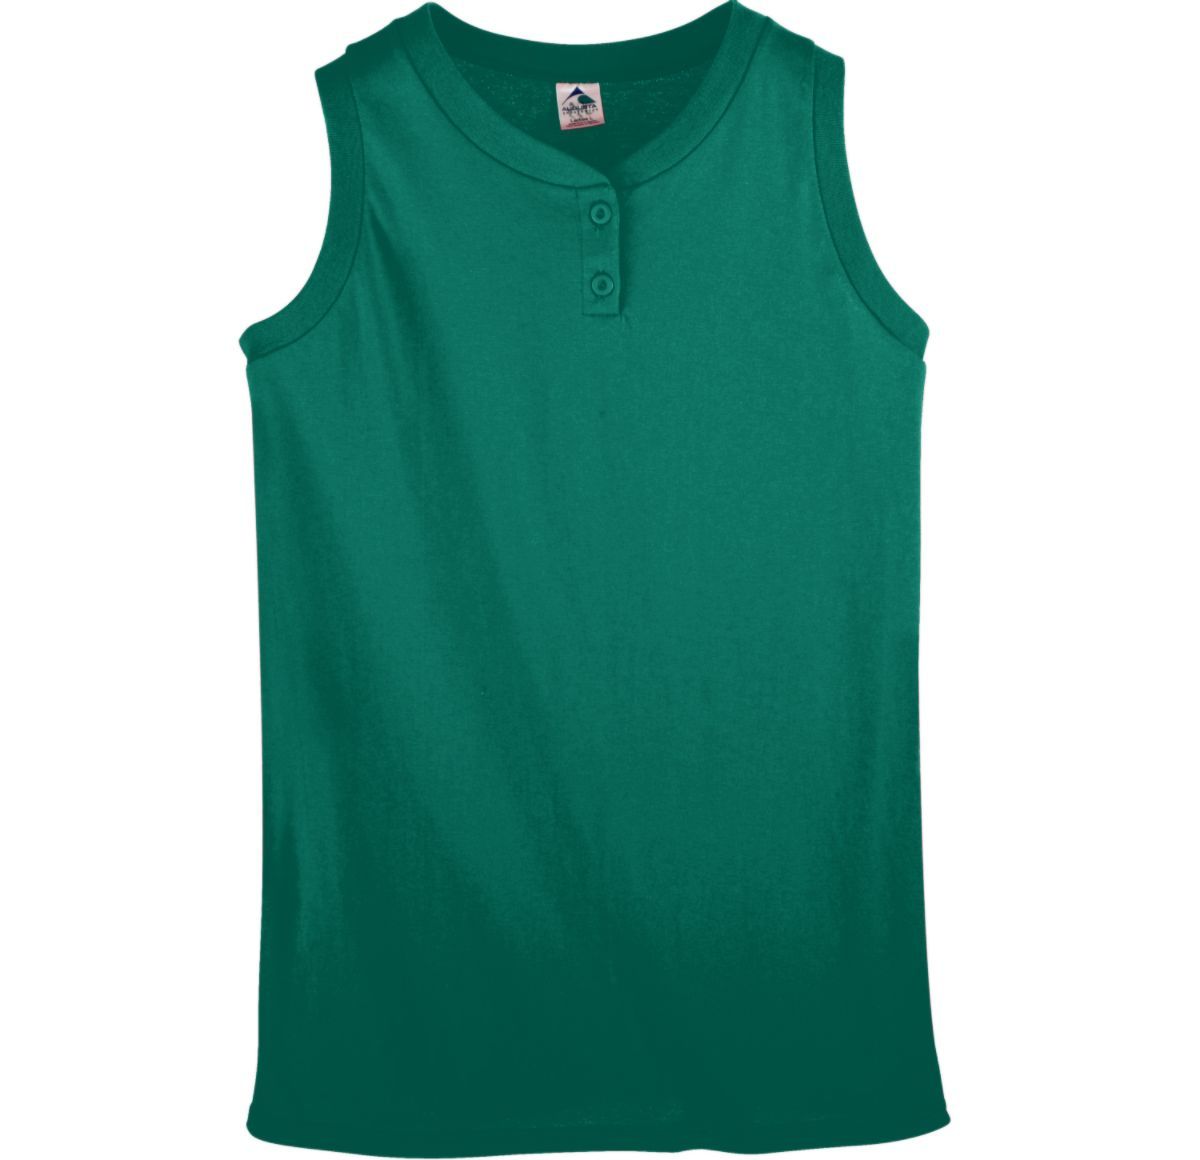 Augusta Sportswear Ladies Sleeveless Two Button Softball Jersey in Dark Green  -Part of the Ladies, Ladies-Jersey, Augusta-Products, Softball, Shirts product lines at KanaleyCreations.com